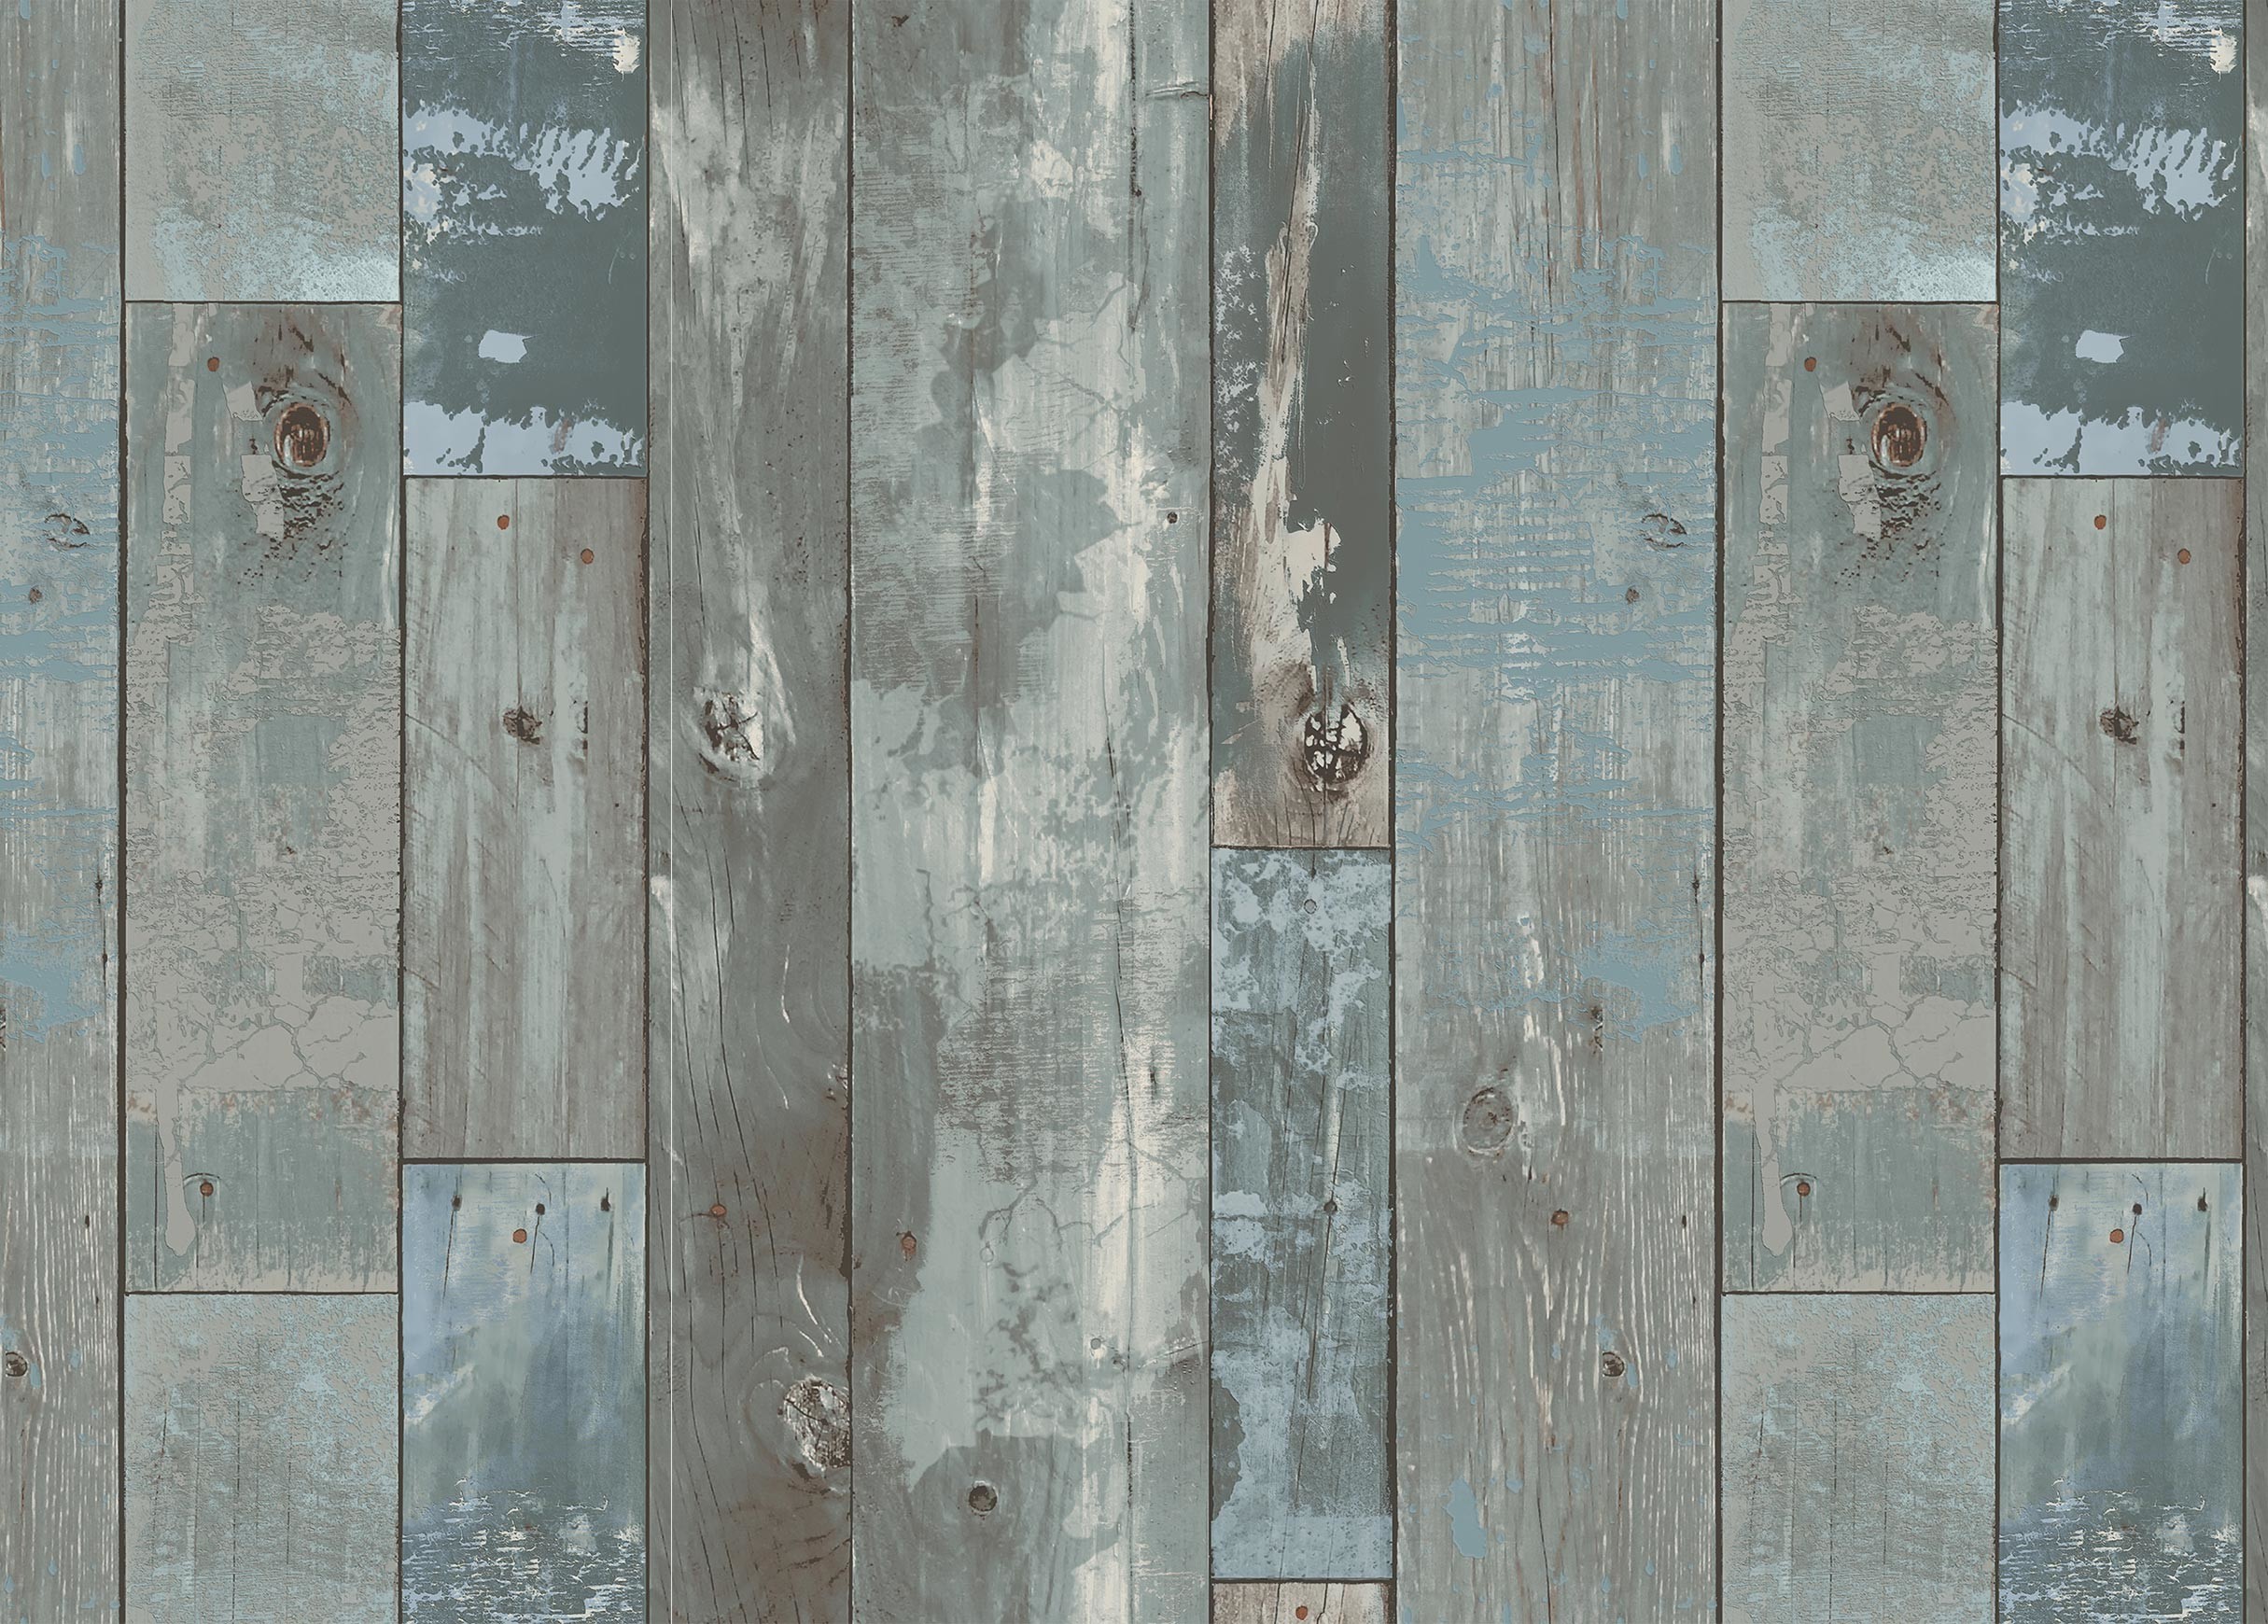 Rustic Wood Plank Wallpaper (36+ images)